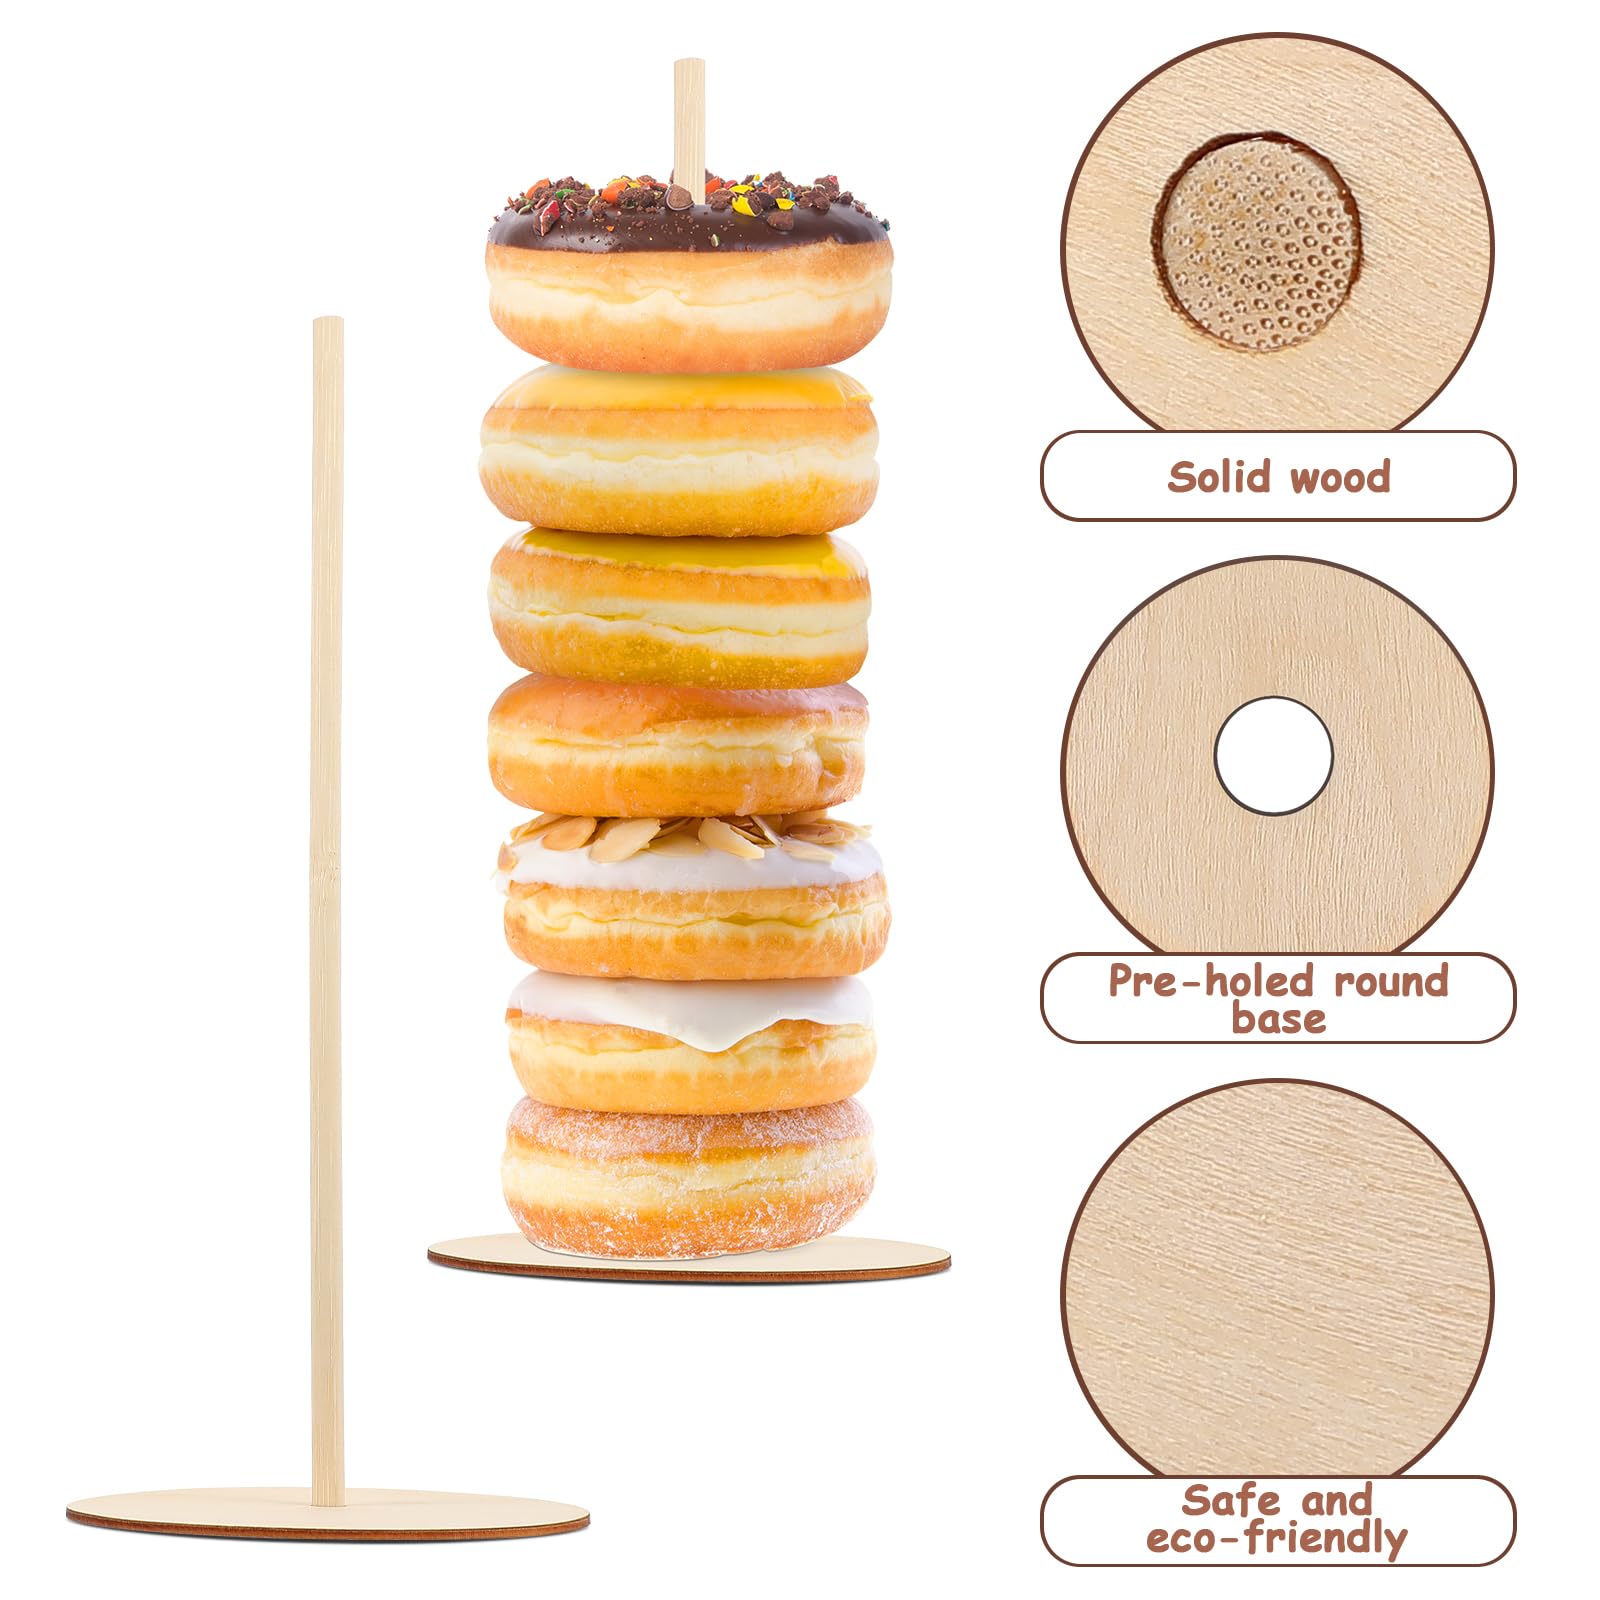 INOOMP 3pcs Display Stand Wood Wood Donut Stand Bar Wooden Donut Bagels Display Stand Holder Reusable Rustic Doughnut Board Holder for Baby Showersfor Wedding Birthday Treat Parties